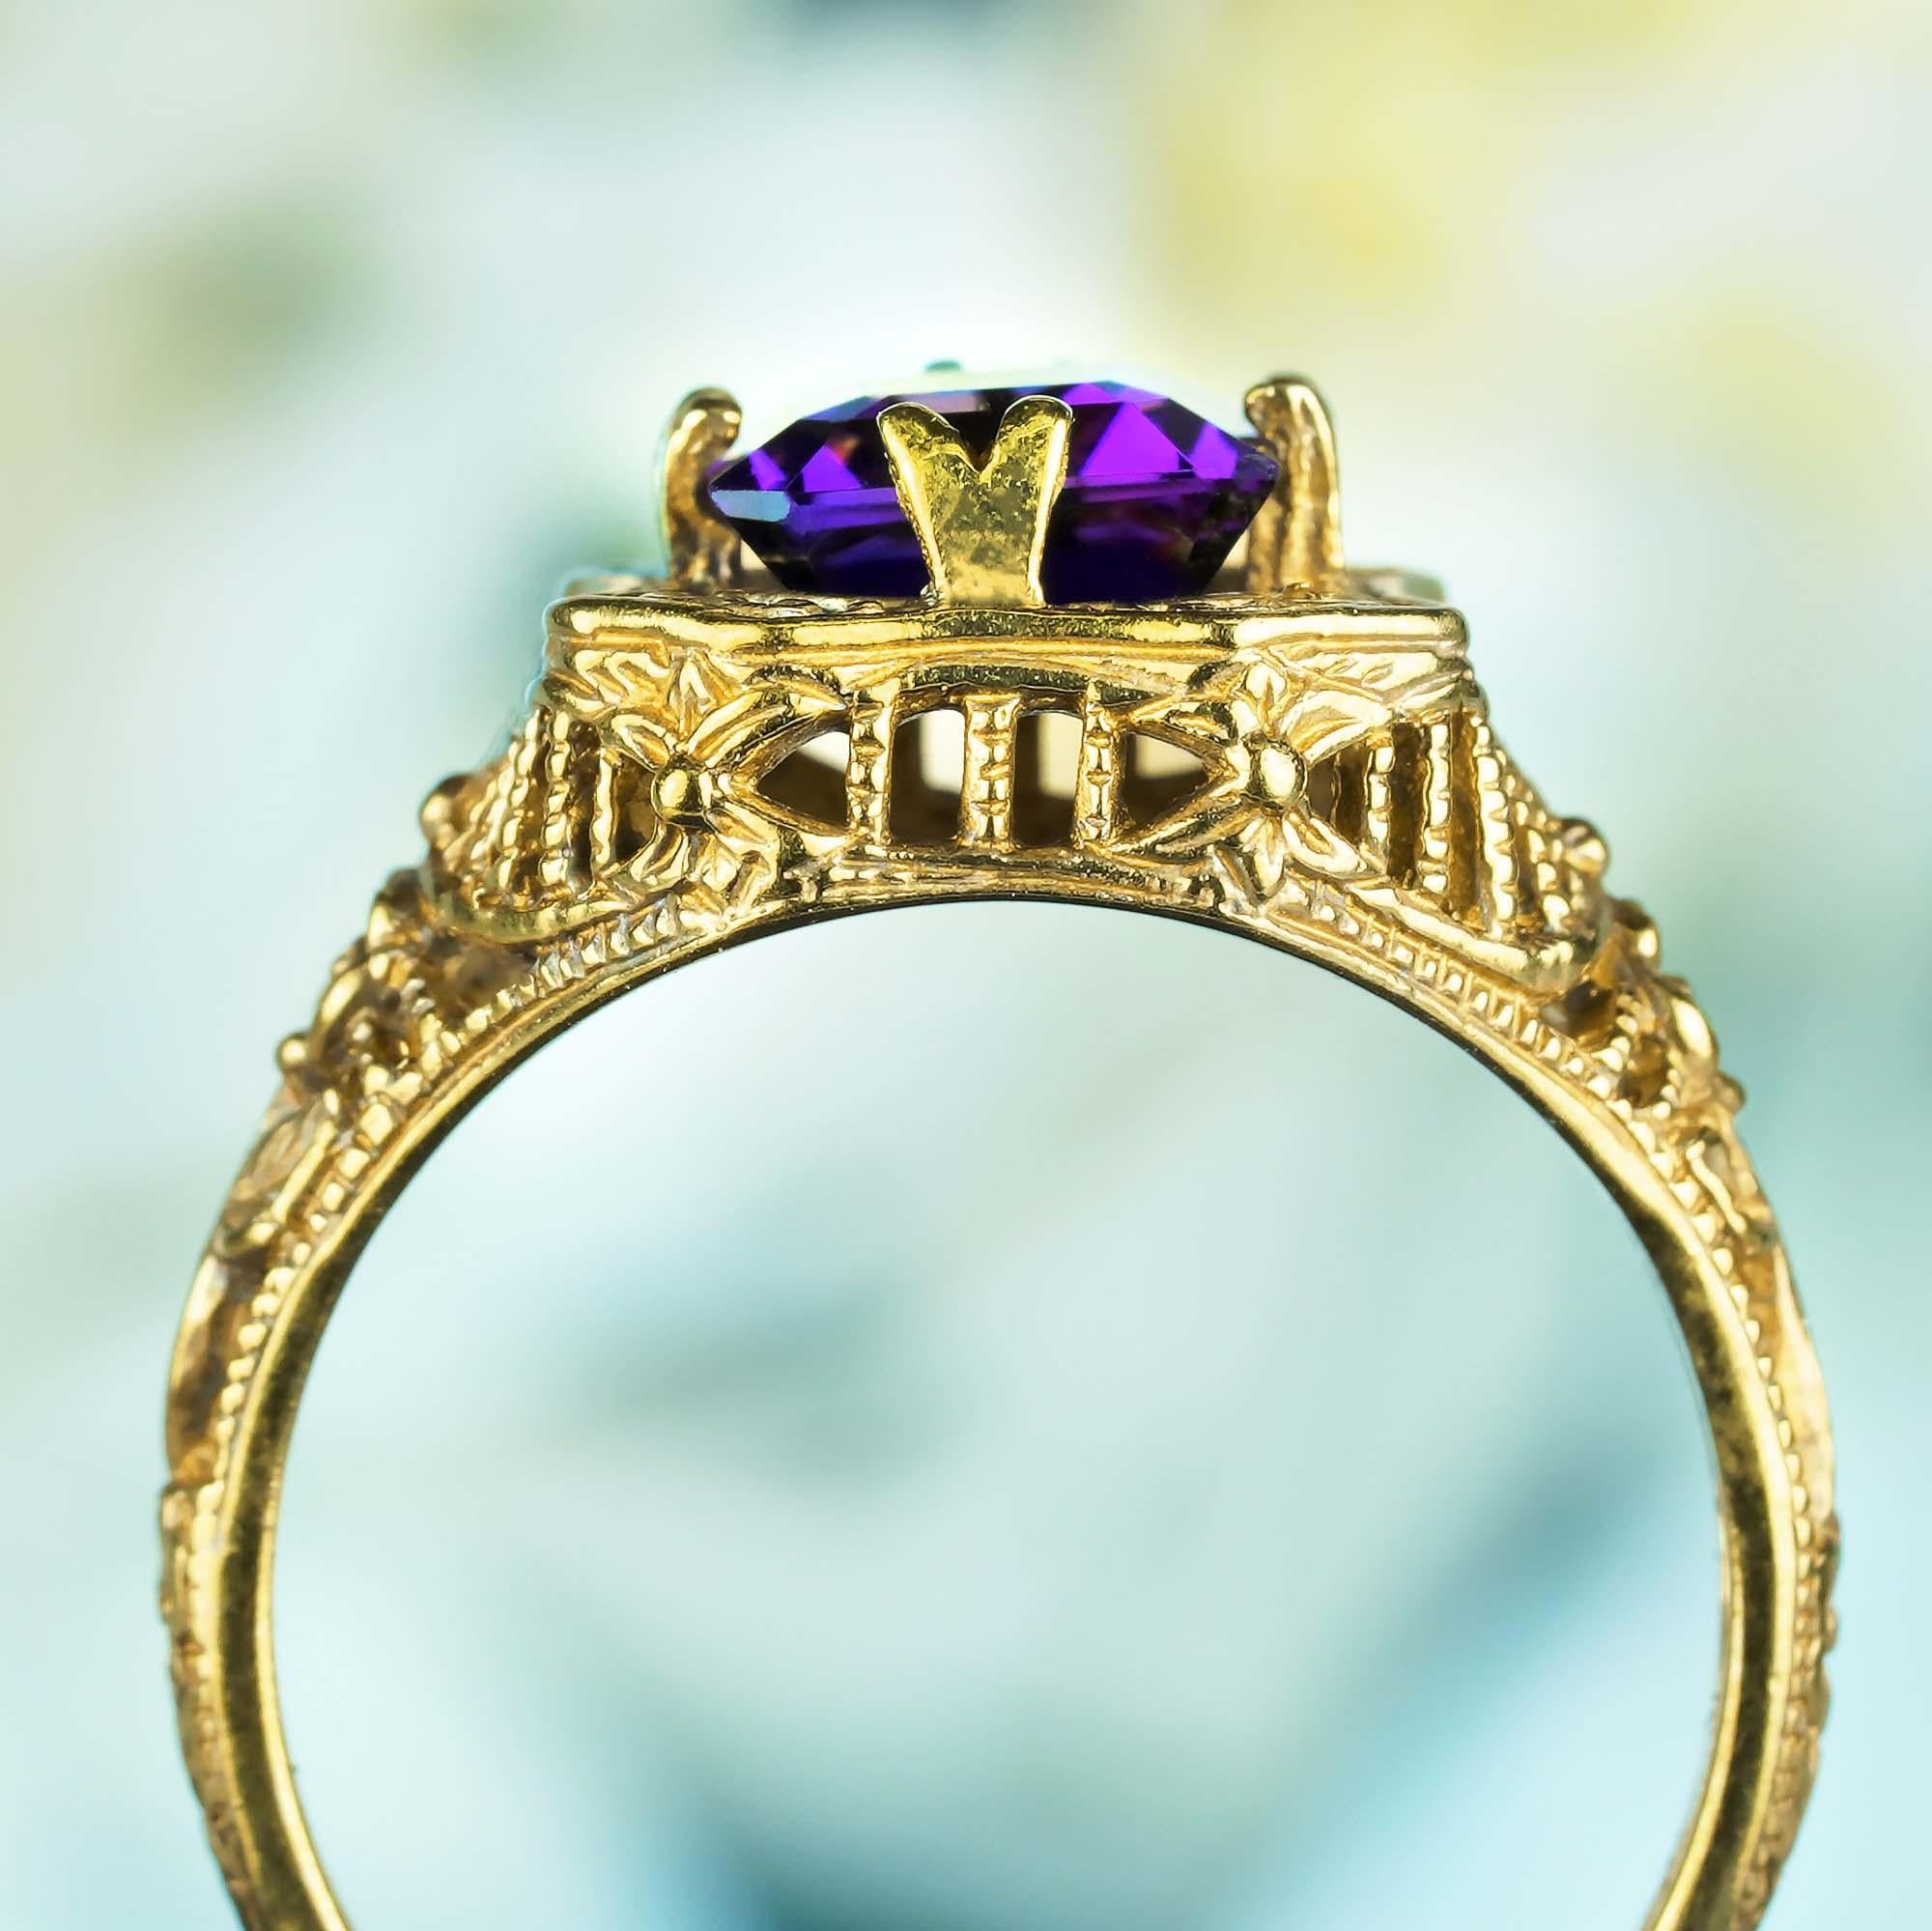 For Sale:  Natural Emerald Cut Amethyst Vintage Style Filigree Ring in Solid 9K Yellow Gold 5